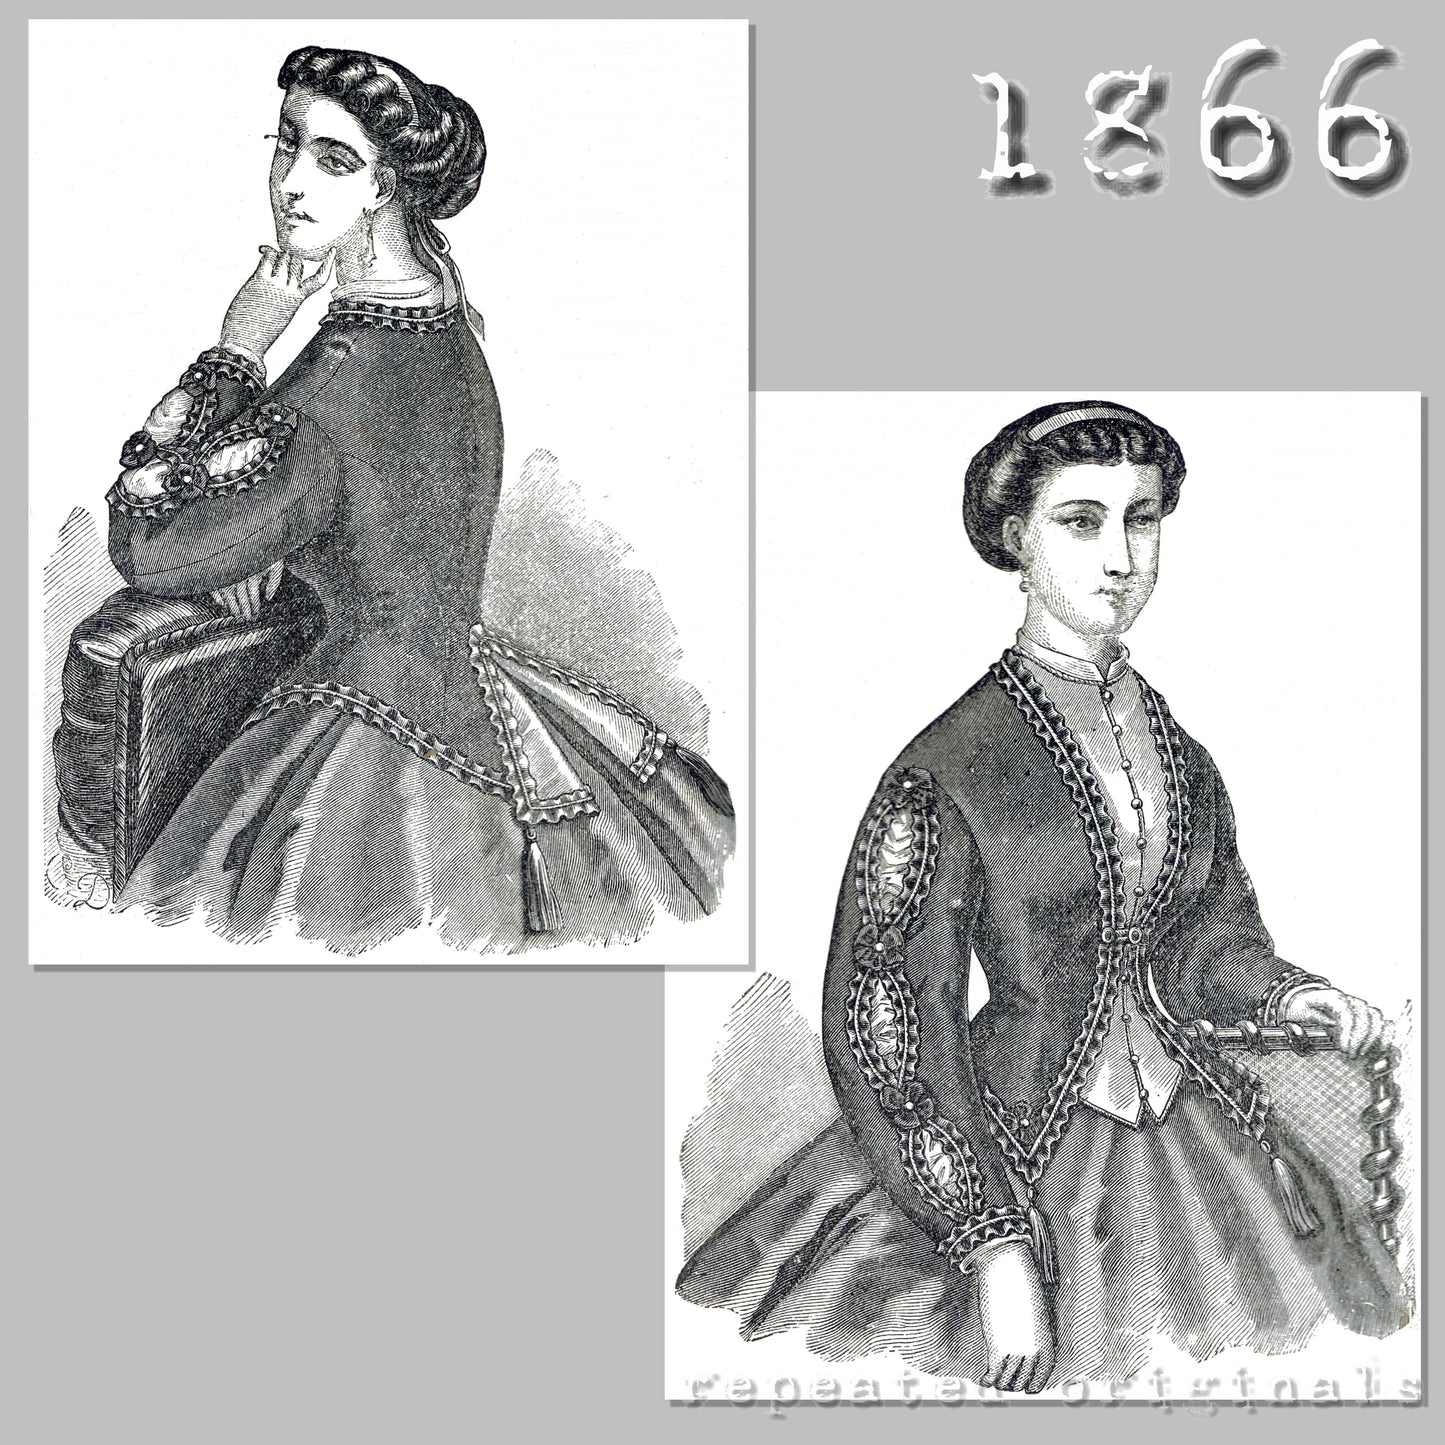 1866 Jacket with Vest Sewing Pattern - INSTANT DOWNLOAD PDF